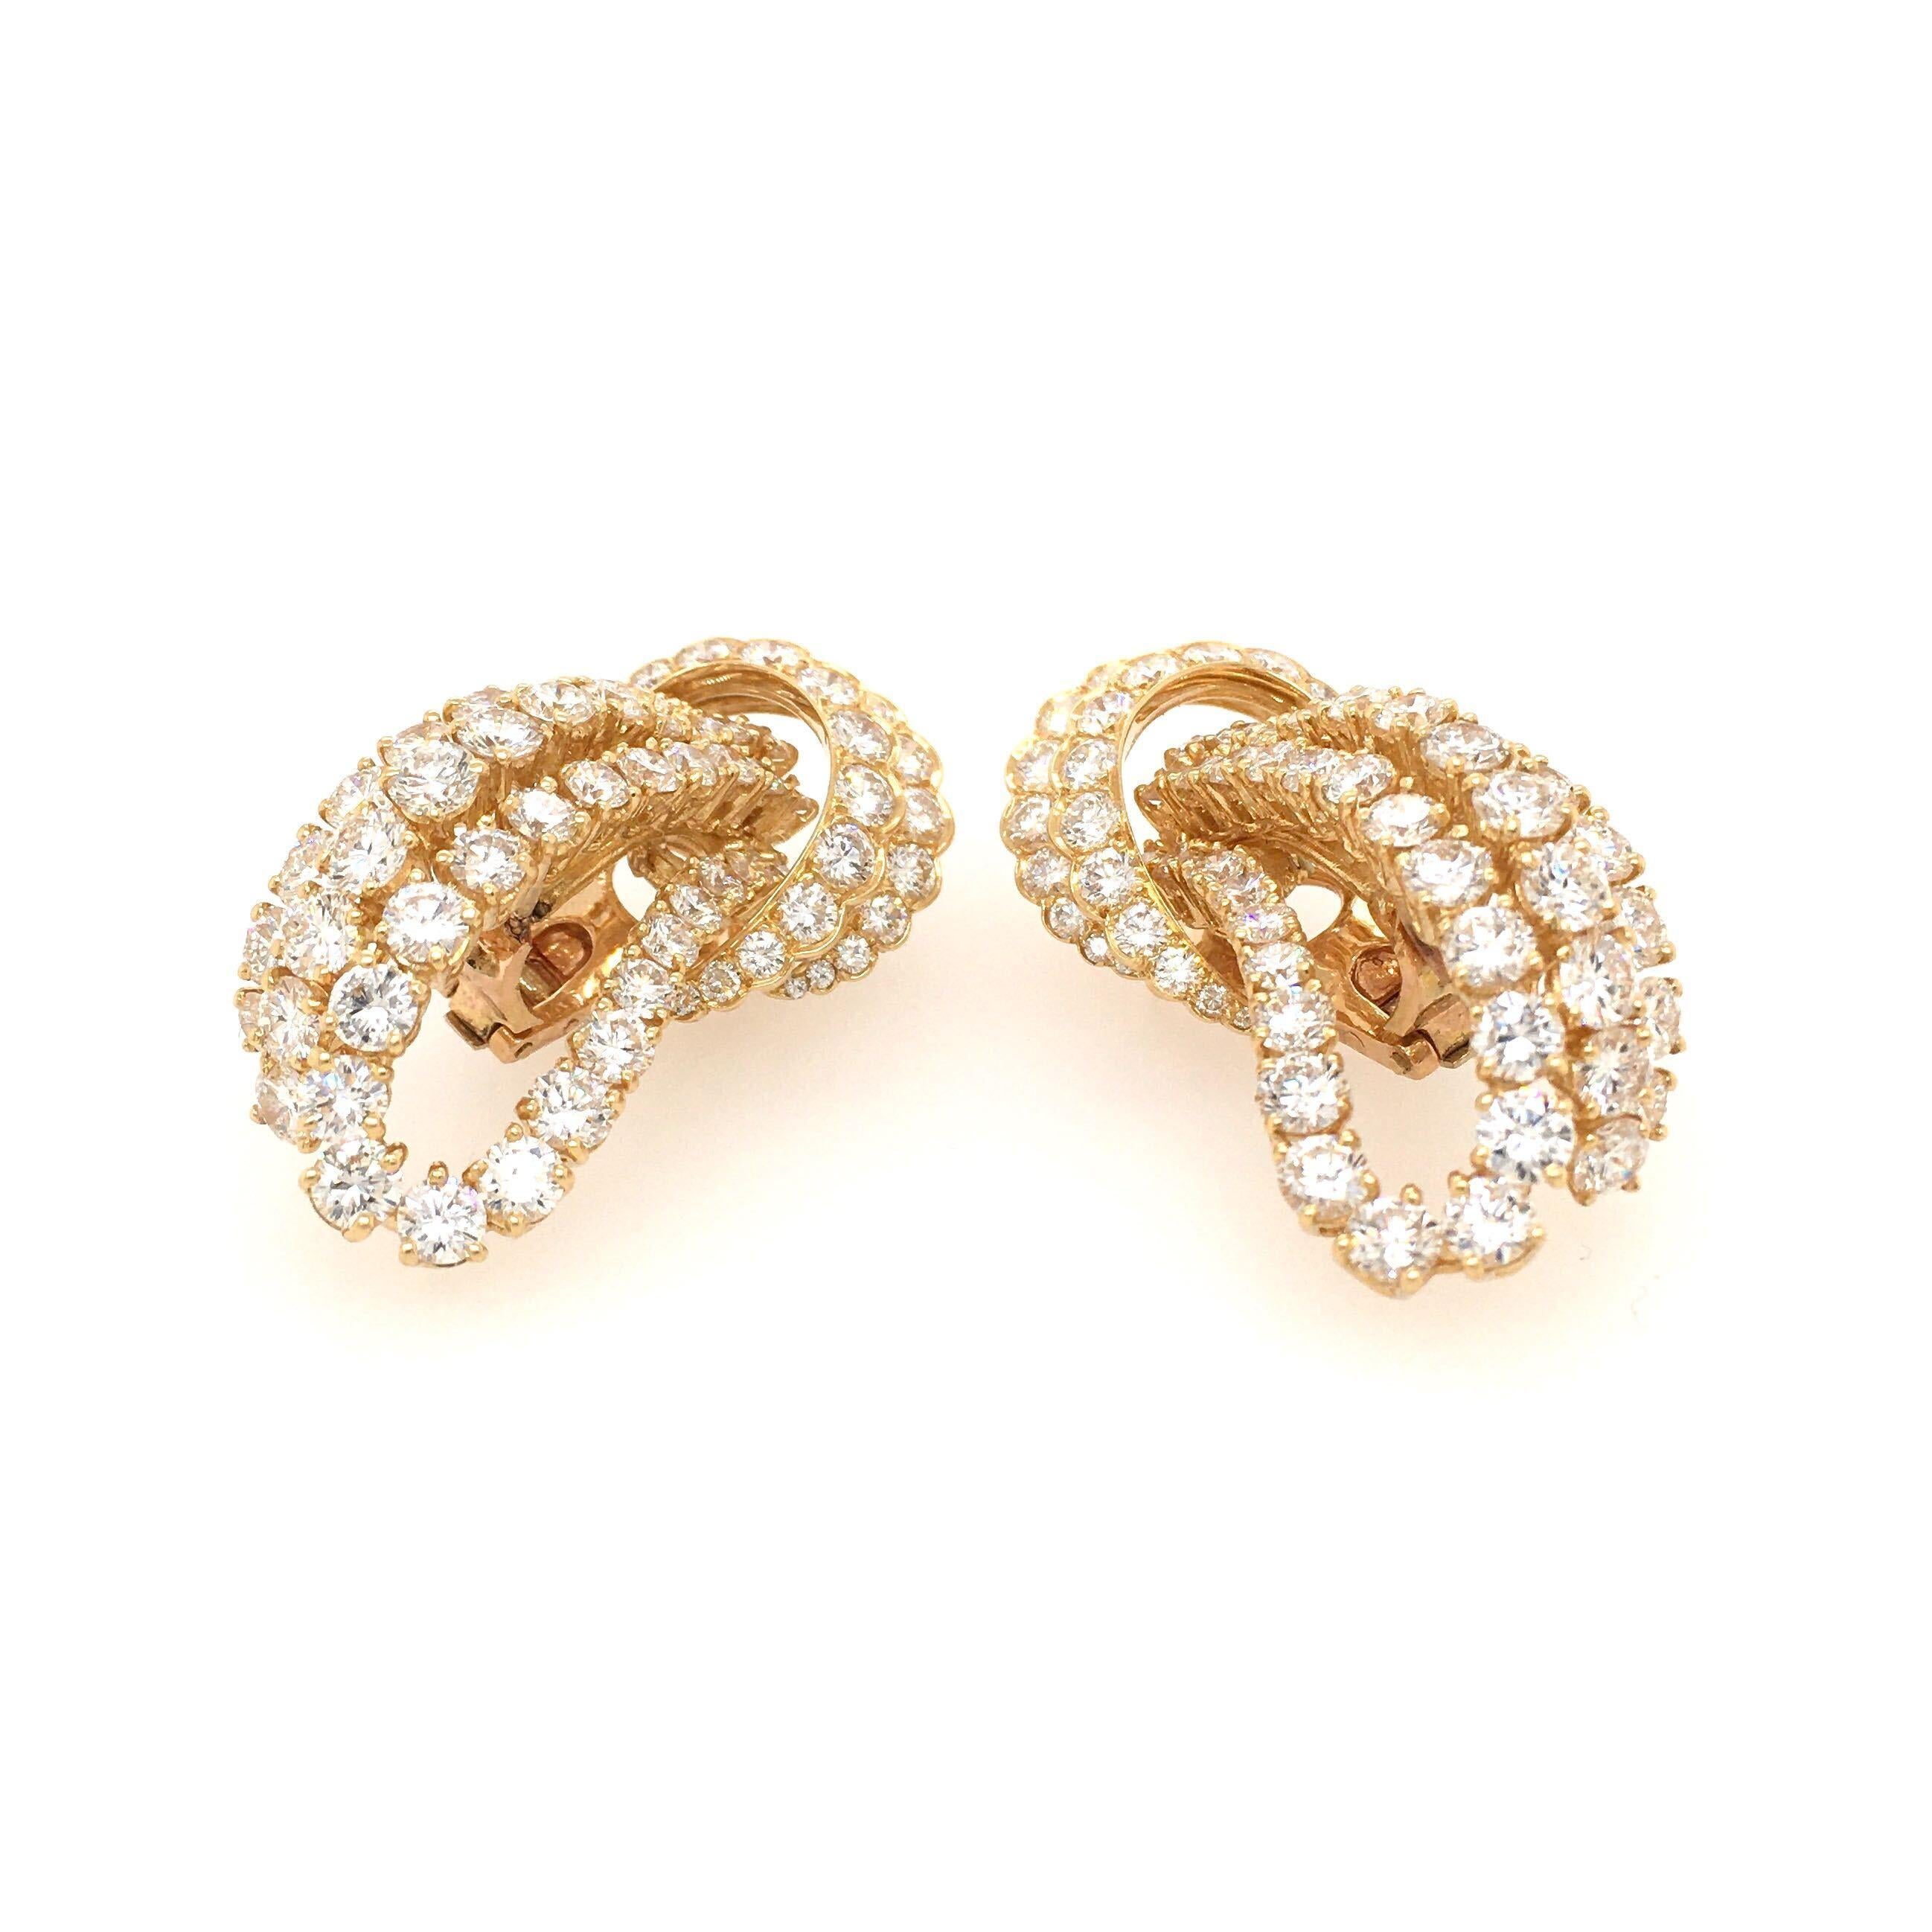 A pair of 18 karat yellow gold and diamond earrings. M. Gerard. Designed as a scrolling diamond loop. One hundred and forty  diamonds weigh approximately 15.00 carats. Length is approximately 1 3/4 inches, gross weight is approximately 30.1 grams.